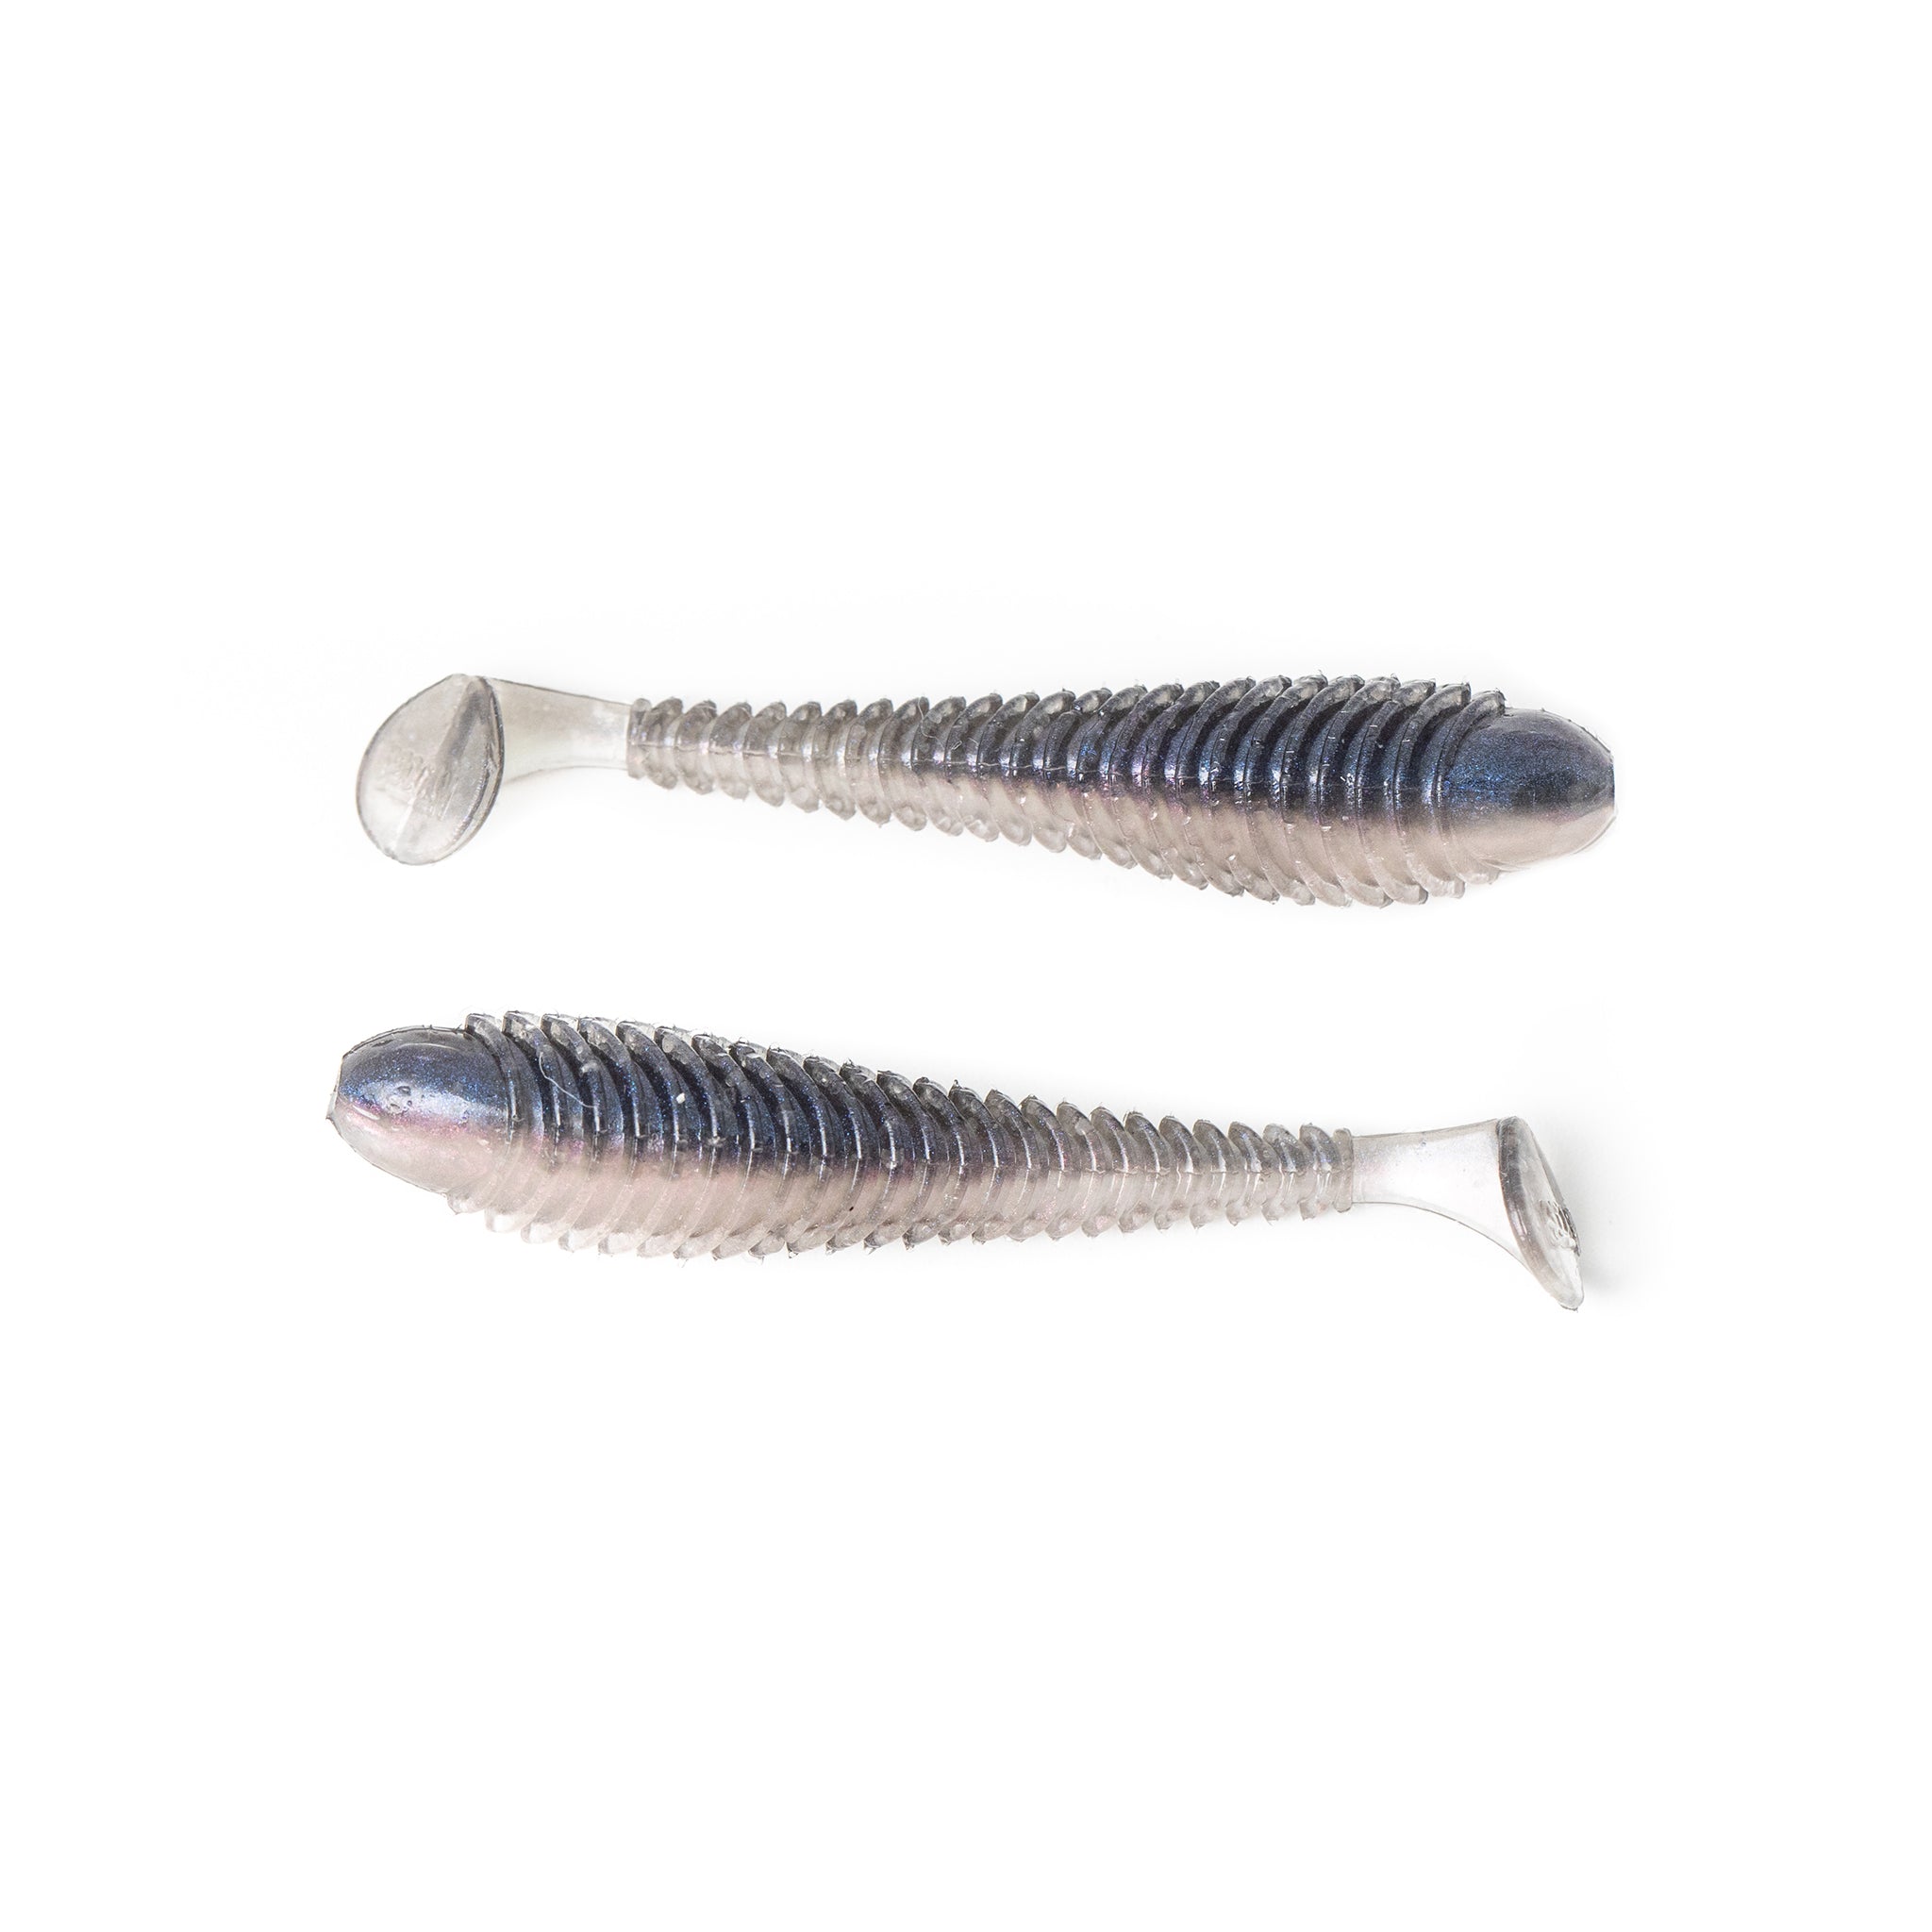 Googan Baits Saucy Swimmer Paddle Tail Shad 3.3, 3.8, And 4.8 inch Fishing  Lure